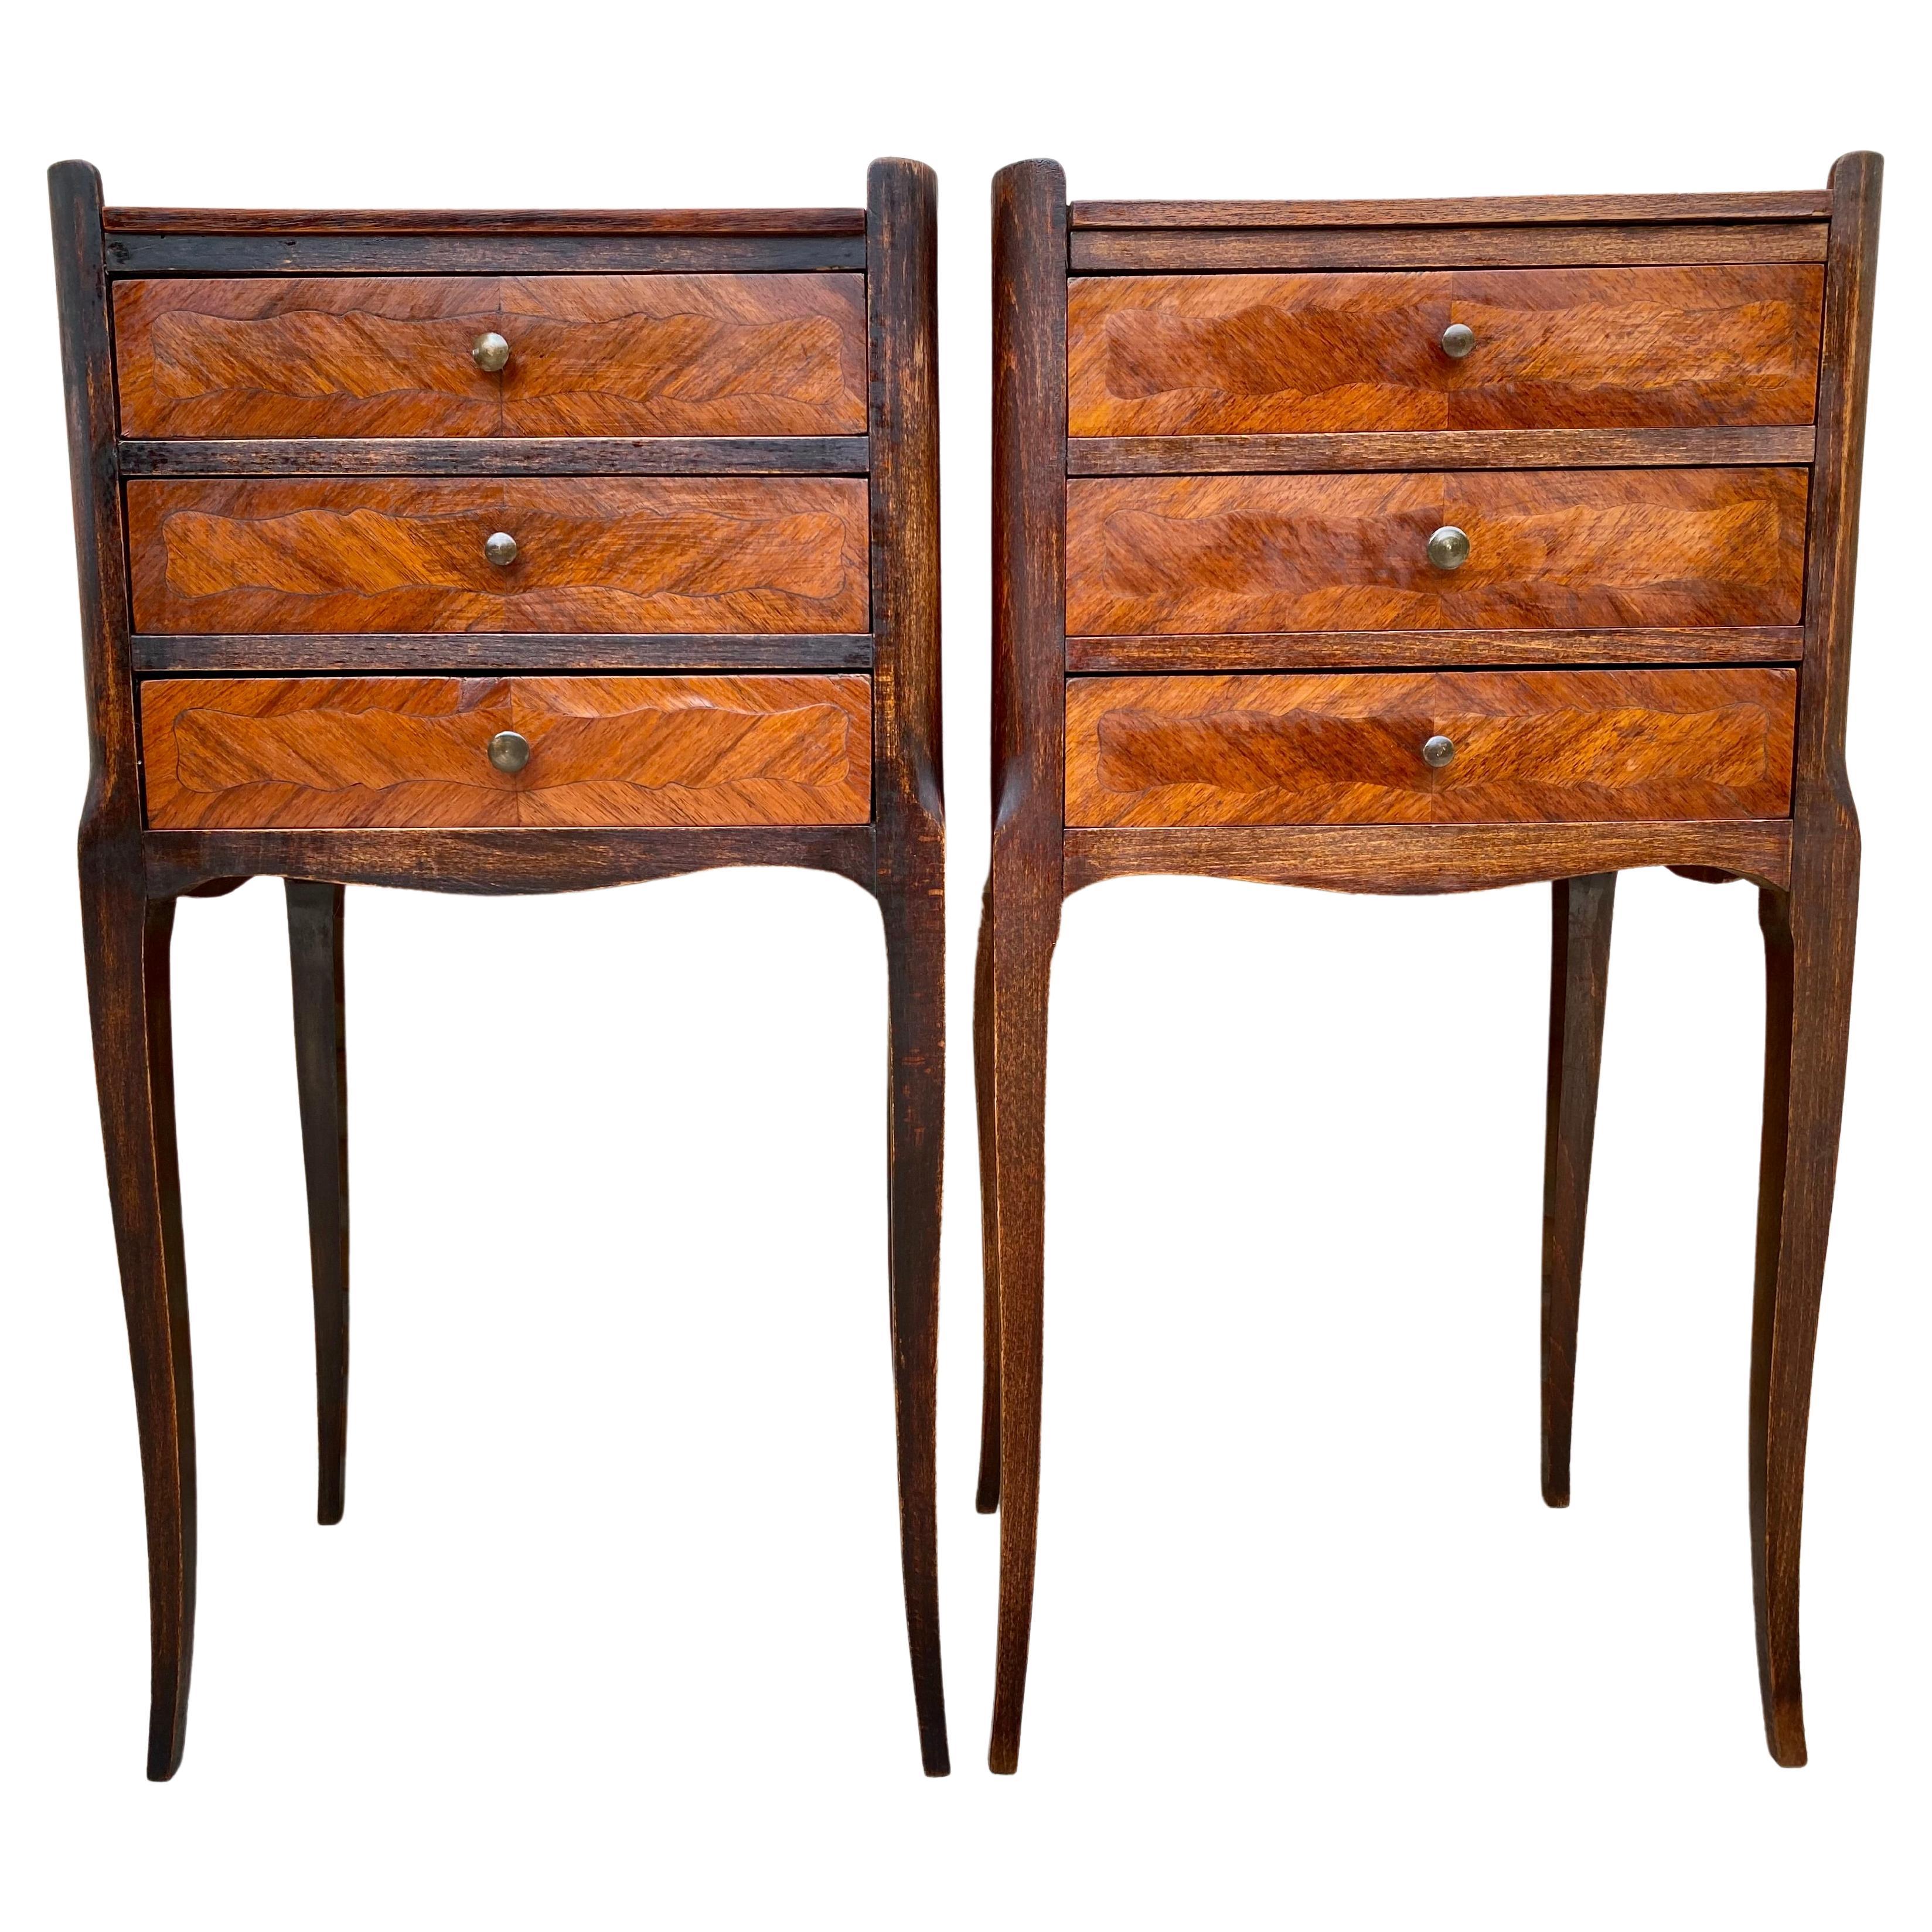 French Walnut Nightstands with Three Drawers, 1940s, Set of 2